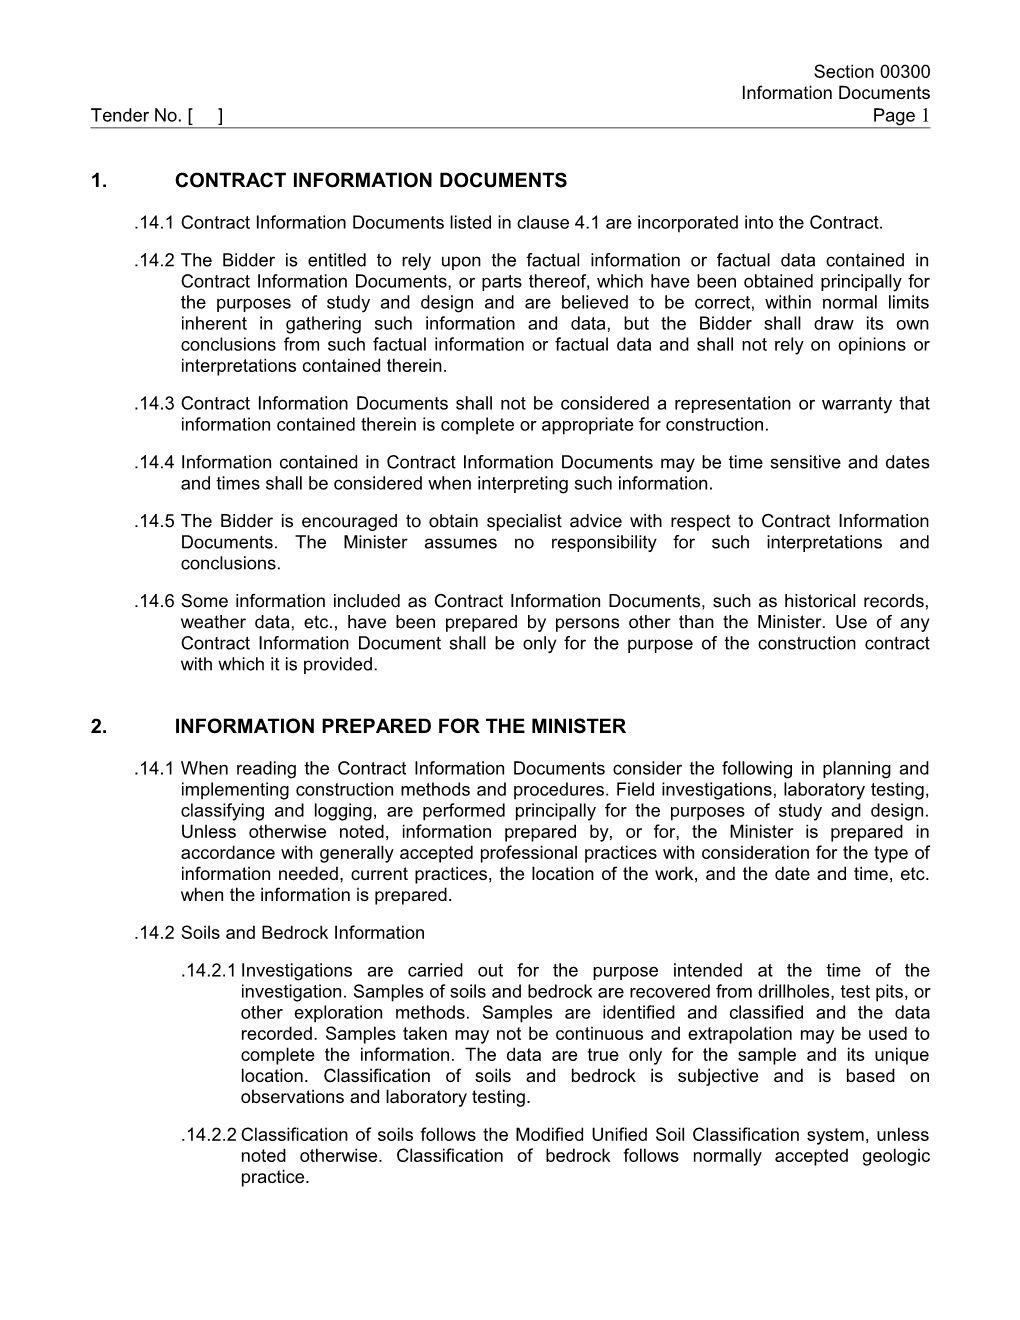 1Contract Information Documents Listed in Clause 4.1 Are Incorporated Into the Contract